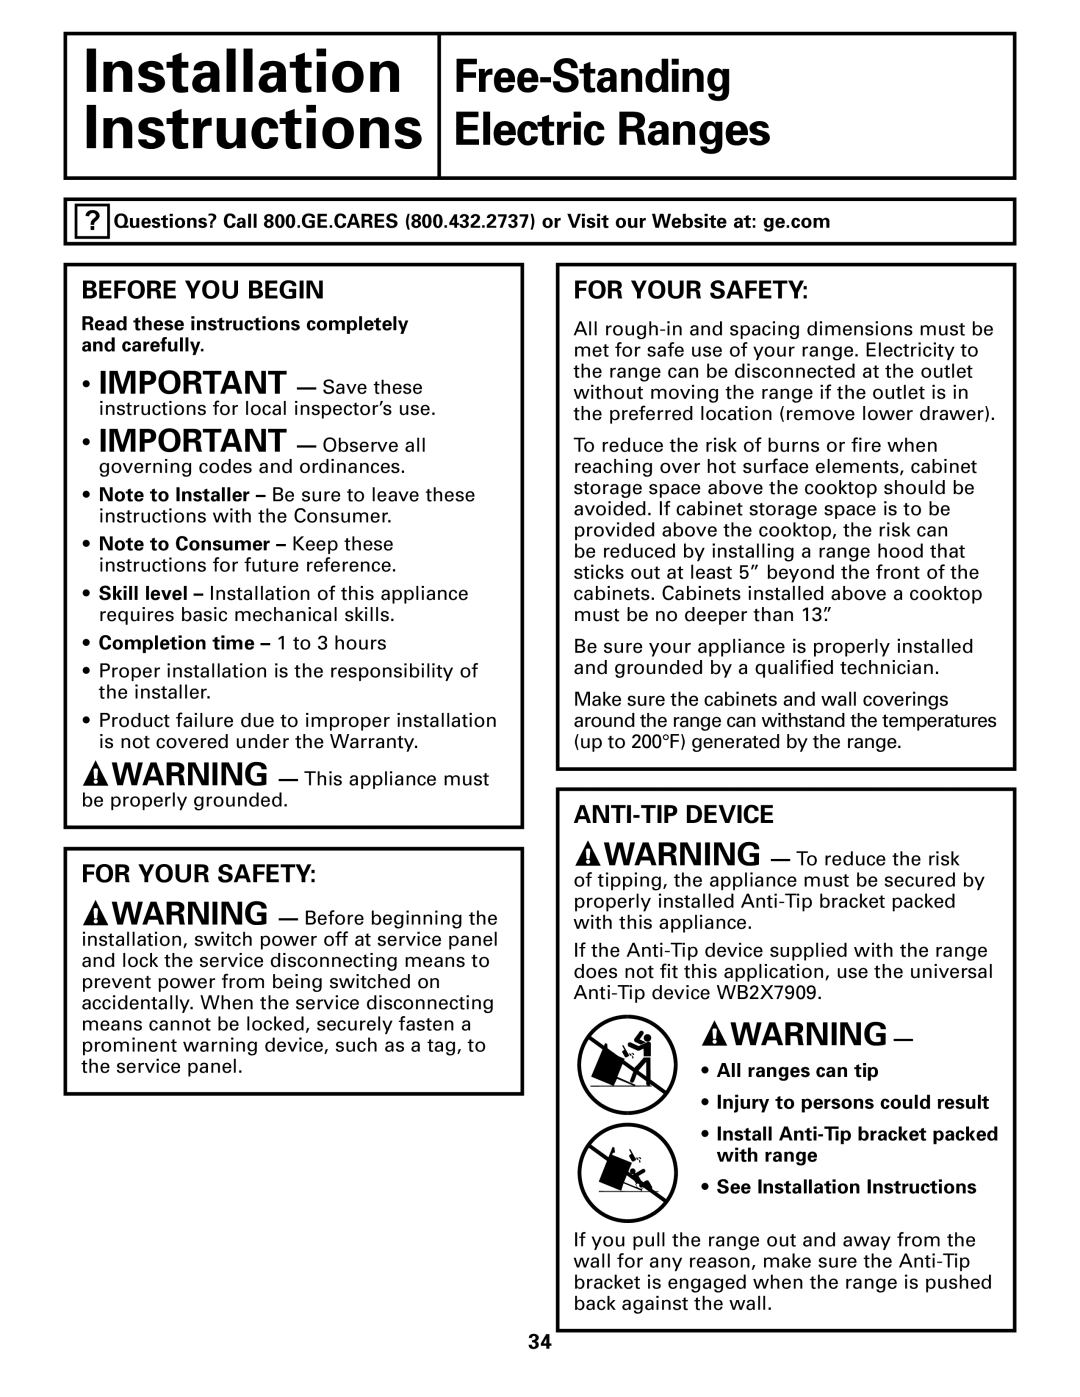 Hotpoint JBS07, JBS56 Before You Begin, For Your Safety, Anti-Tipdevice, Read these instructions completely and carefully 